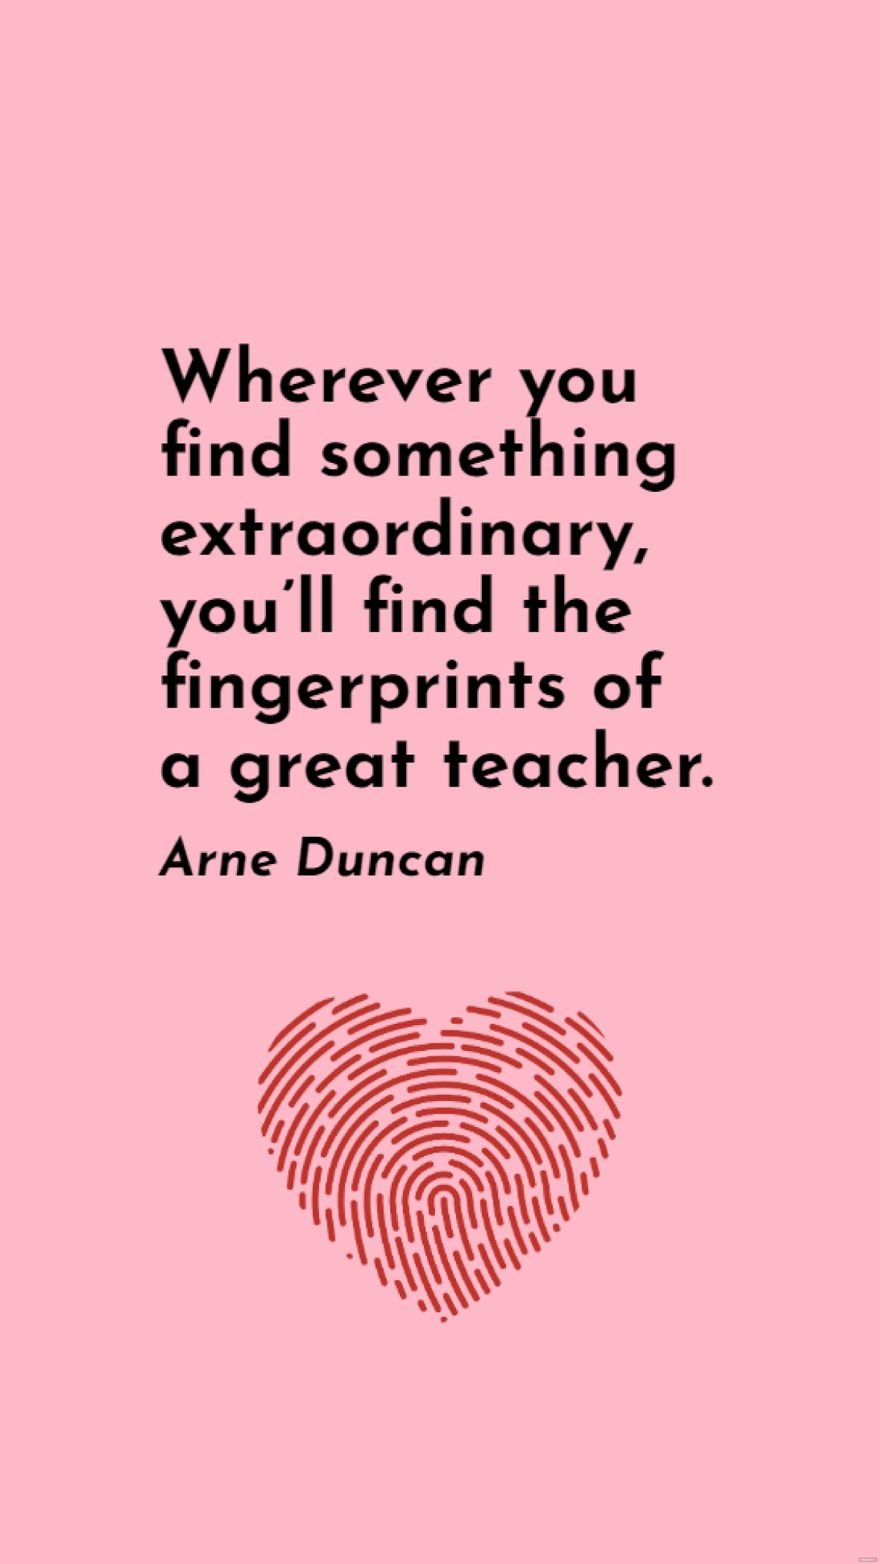 Arne Duncan - Wherever you find something extraordinary, you’ll find the fingerprints of a great teacher.